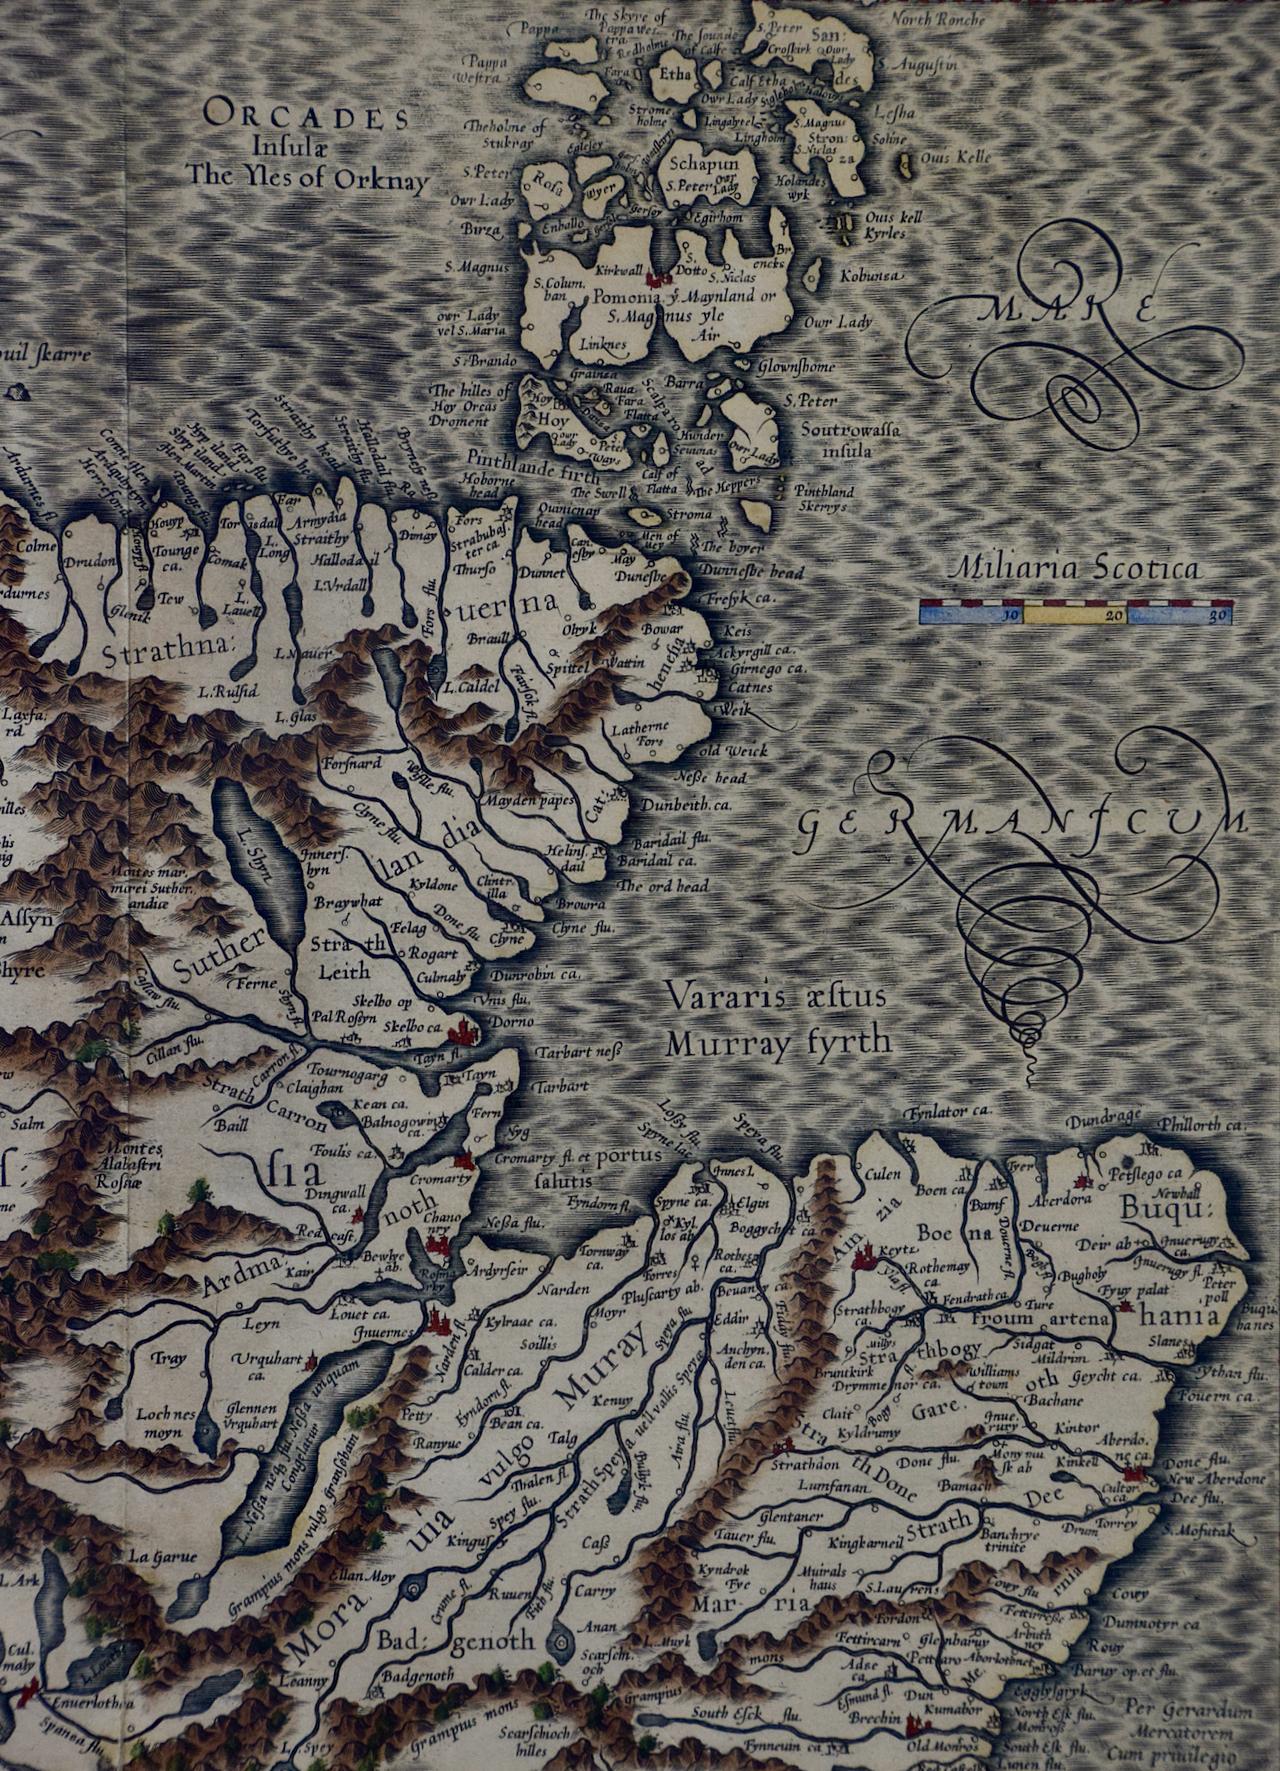 Dutch Northern Scotland: A 16th Century Hand-colored Map by Mercator For Sale